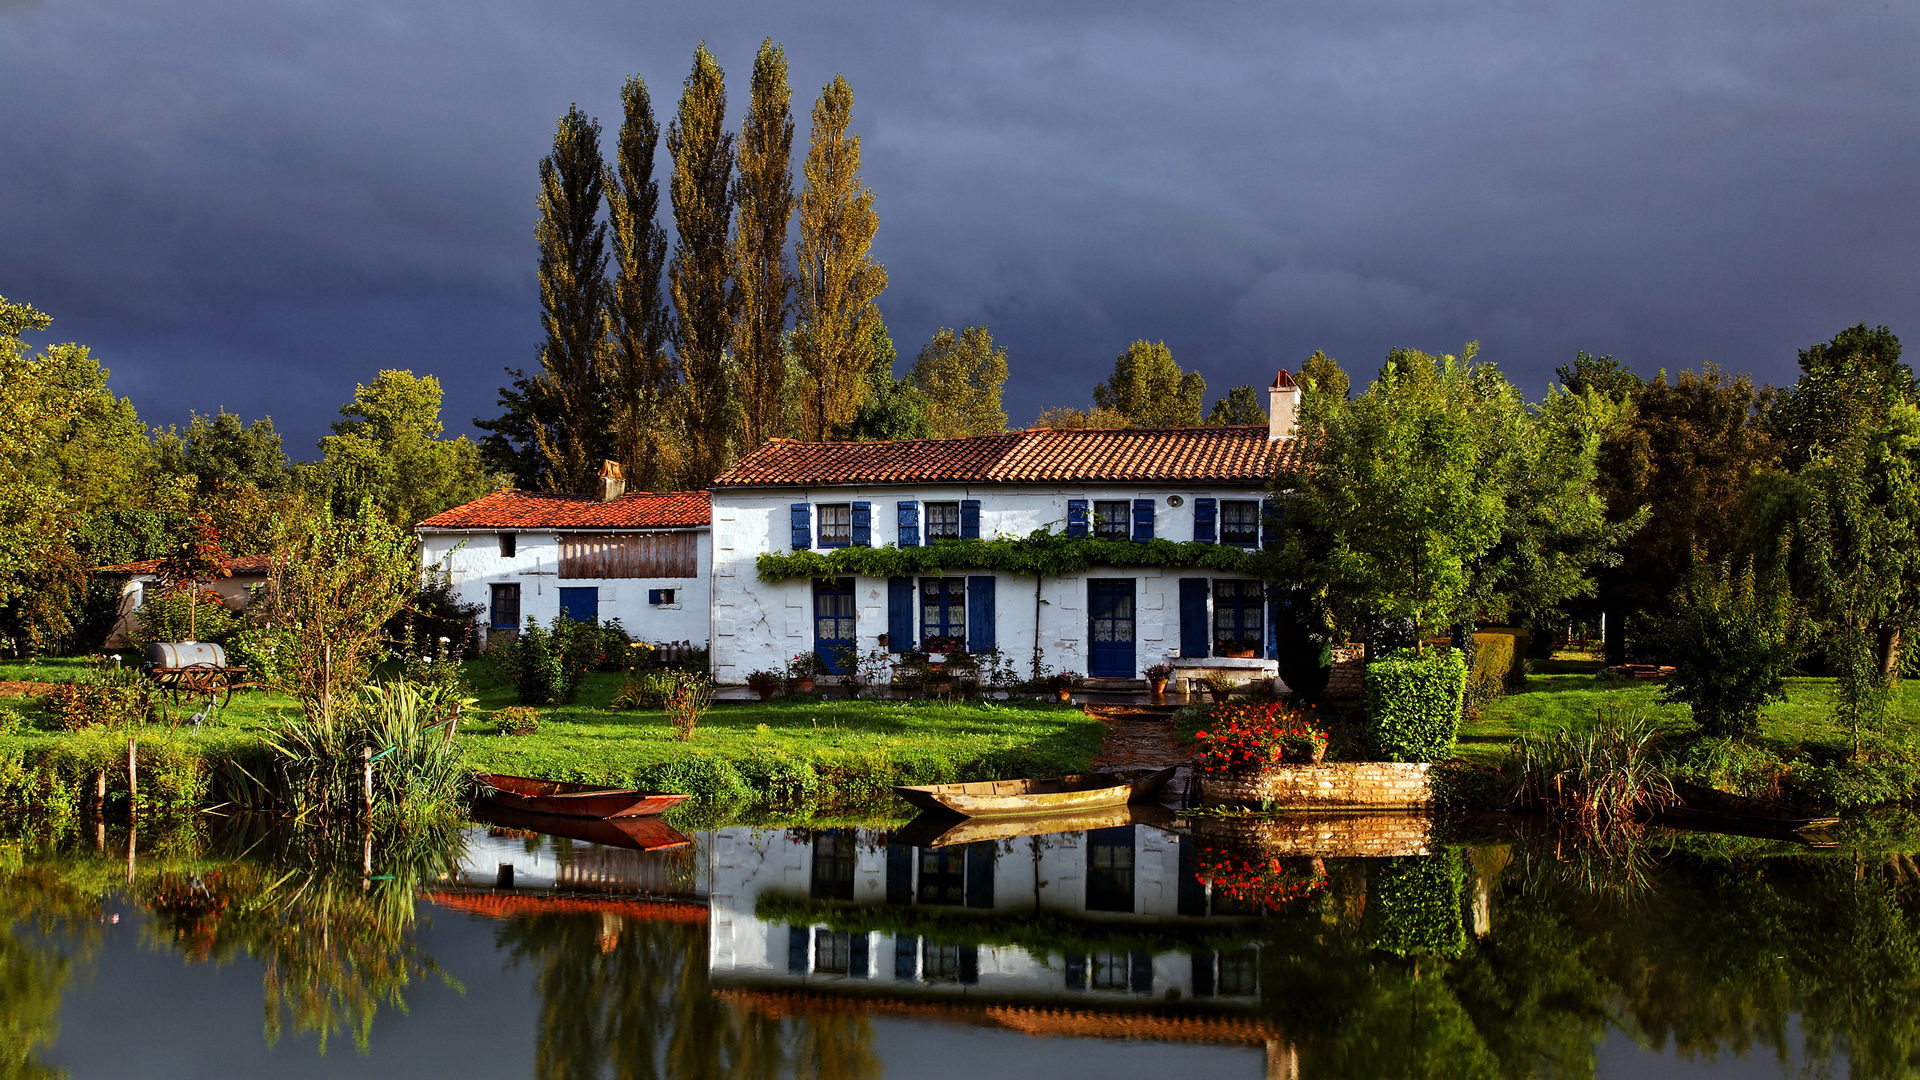 grass, bush, man made, house, boat, building, garden, lake, landscape, mansion, old, photography, reflection, sky, tree, water